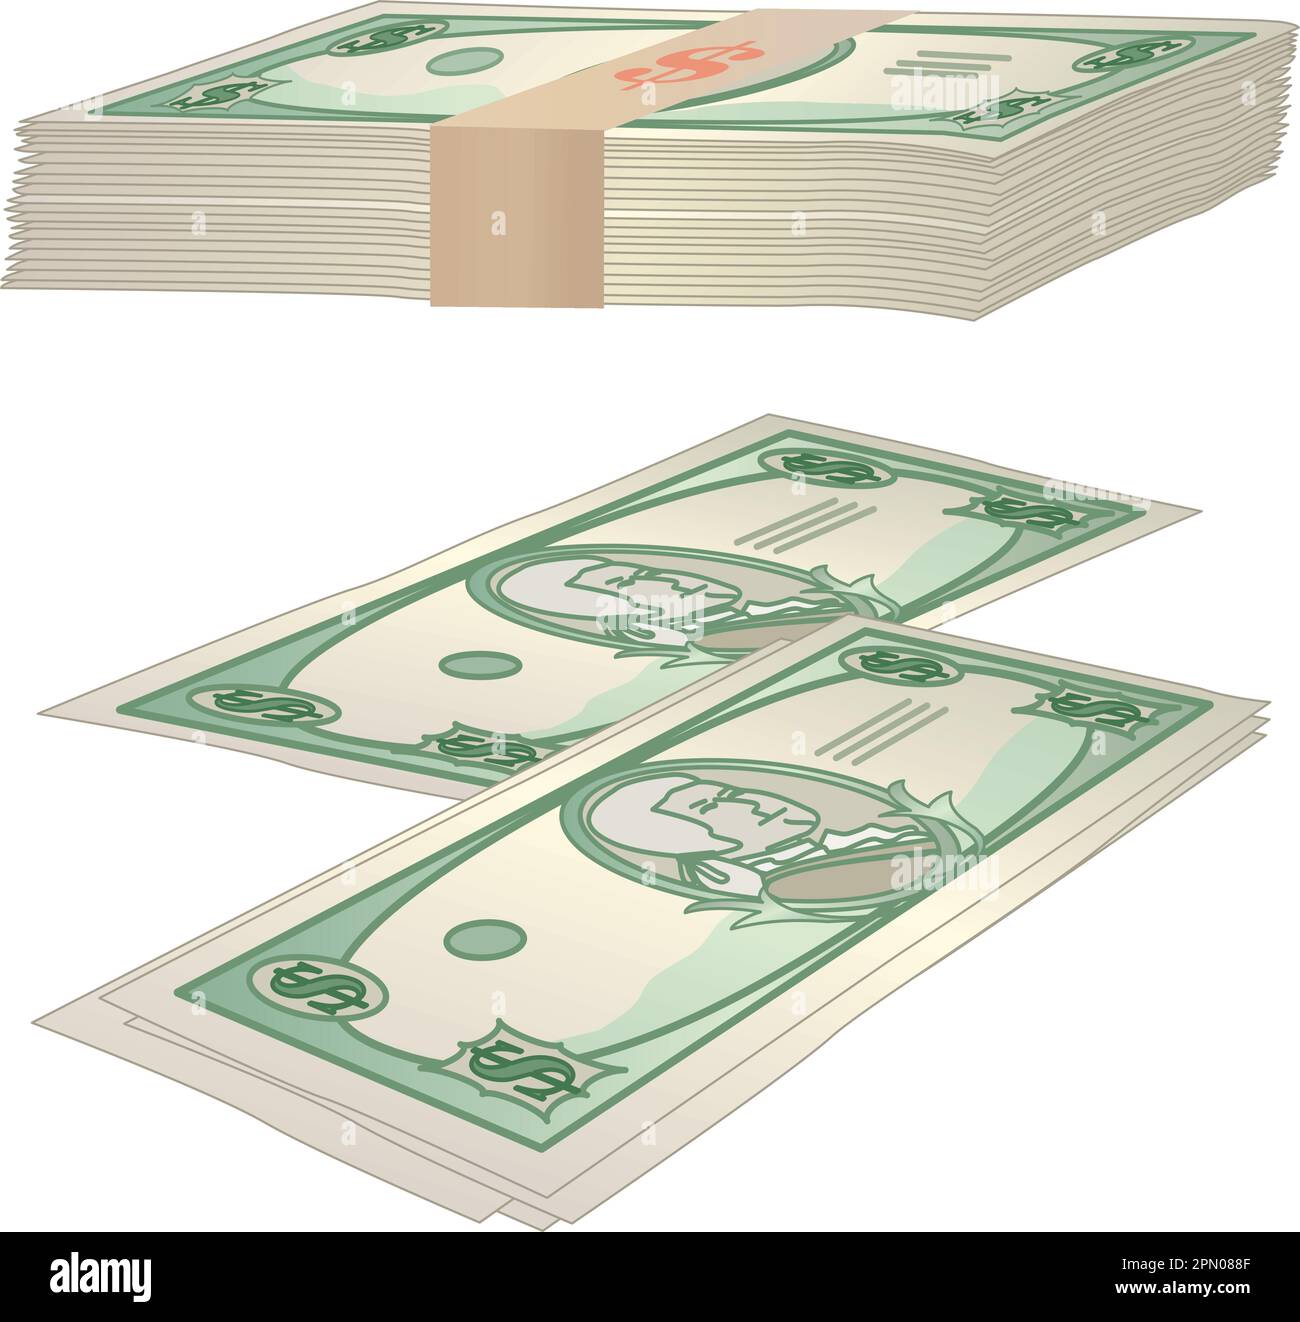 Money, lots of money in US Dollars - could be $1, $10, $100, $1,000?. Saved as Adobe Illustrator 8.0 for optimum compatibility. Stock Vector